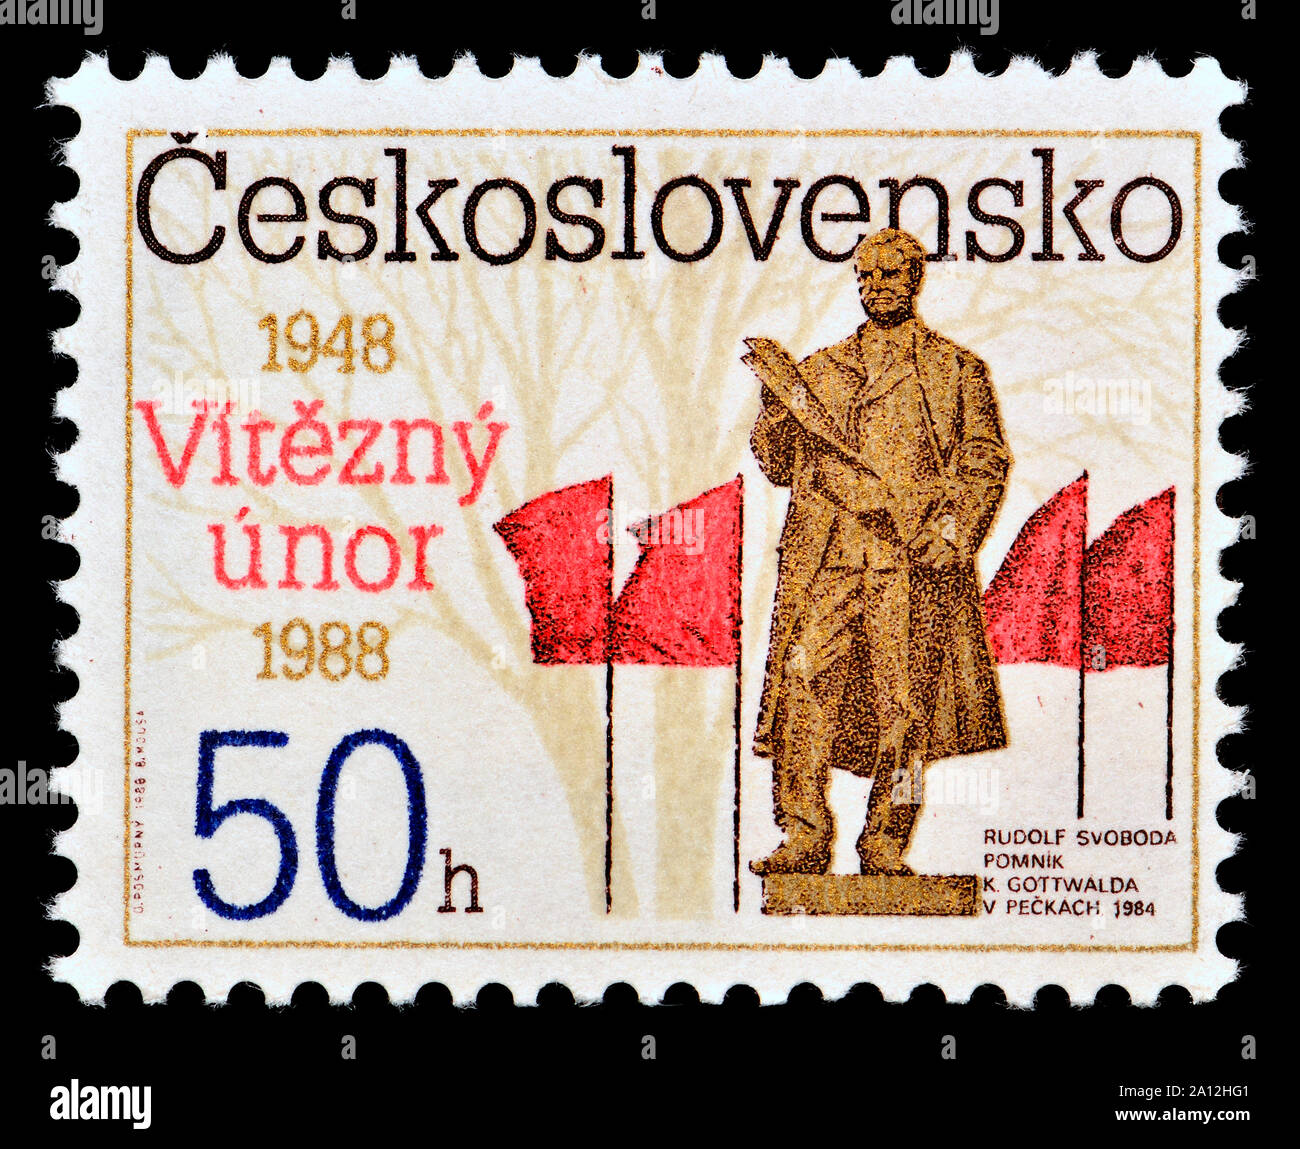 Czechoslovakian postage stamp (1988) : 'Victorious February' and National Front, 40th Anniversary Stock Photo